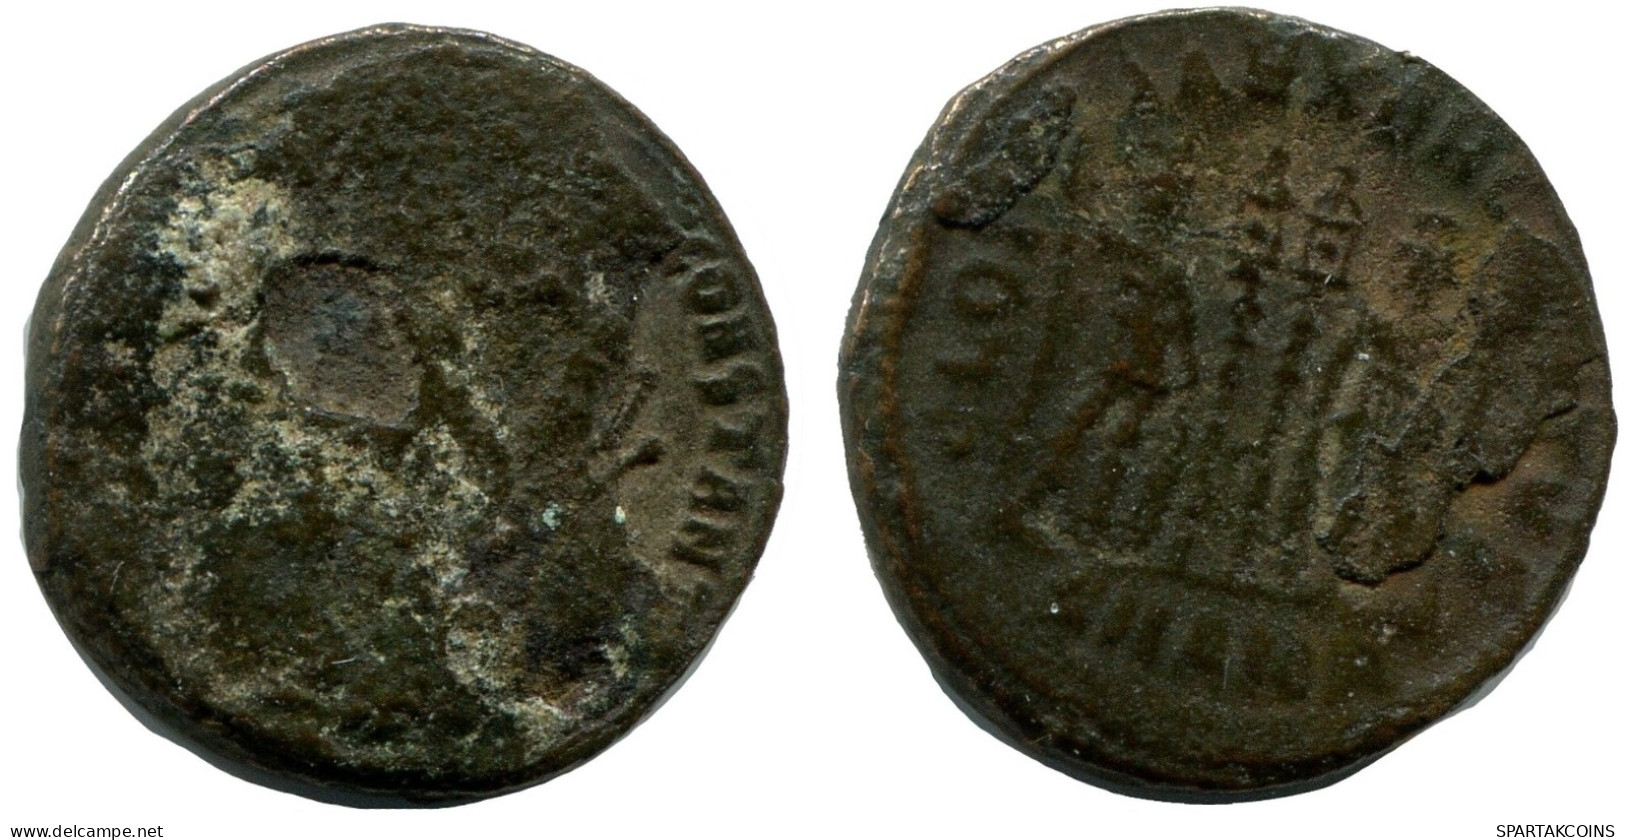 CONSTANTINE I MINTED IN ANTIOCH FOUND IN IHNASYAH HOARD EGYPT #ANC10623.14.D.A - El Impero Christiano (307 / 363)